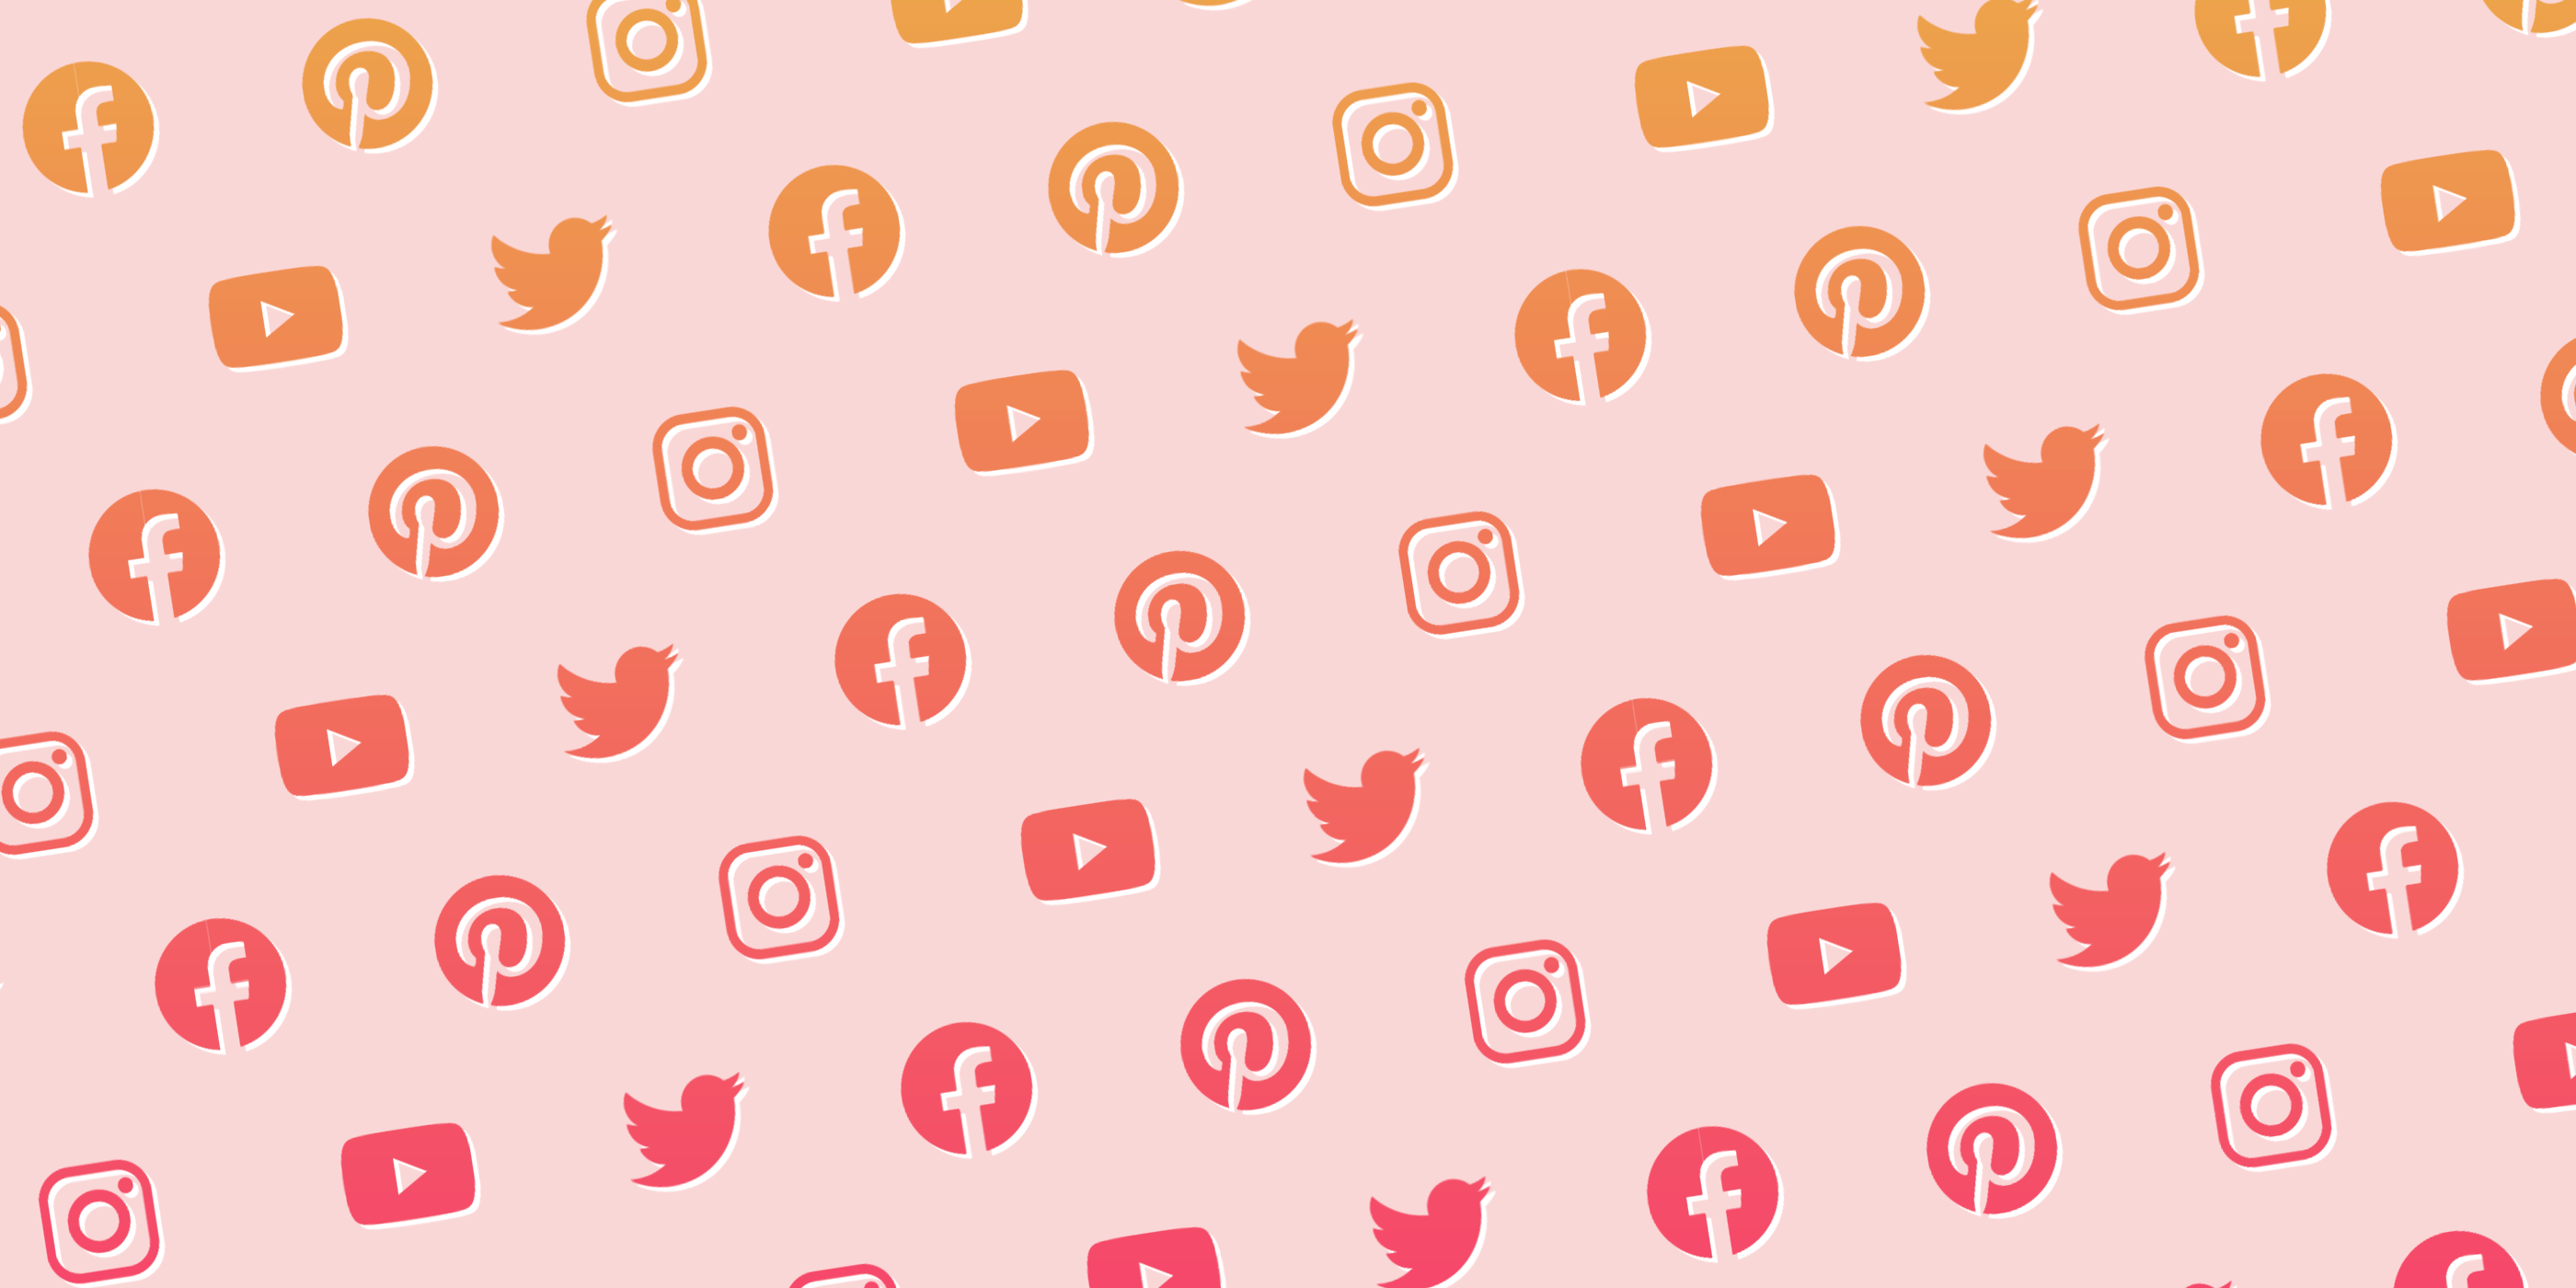 30 Social Media Statistics Every Marketer Should Know